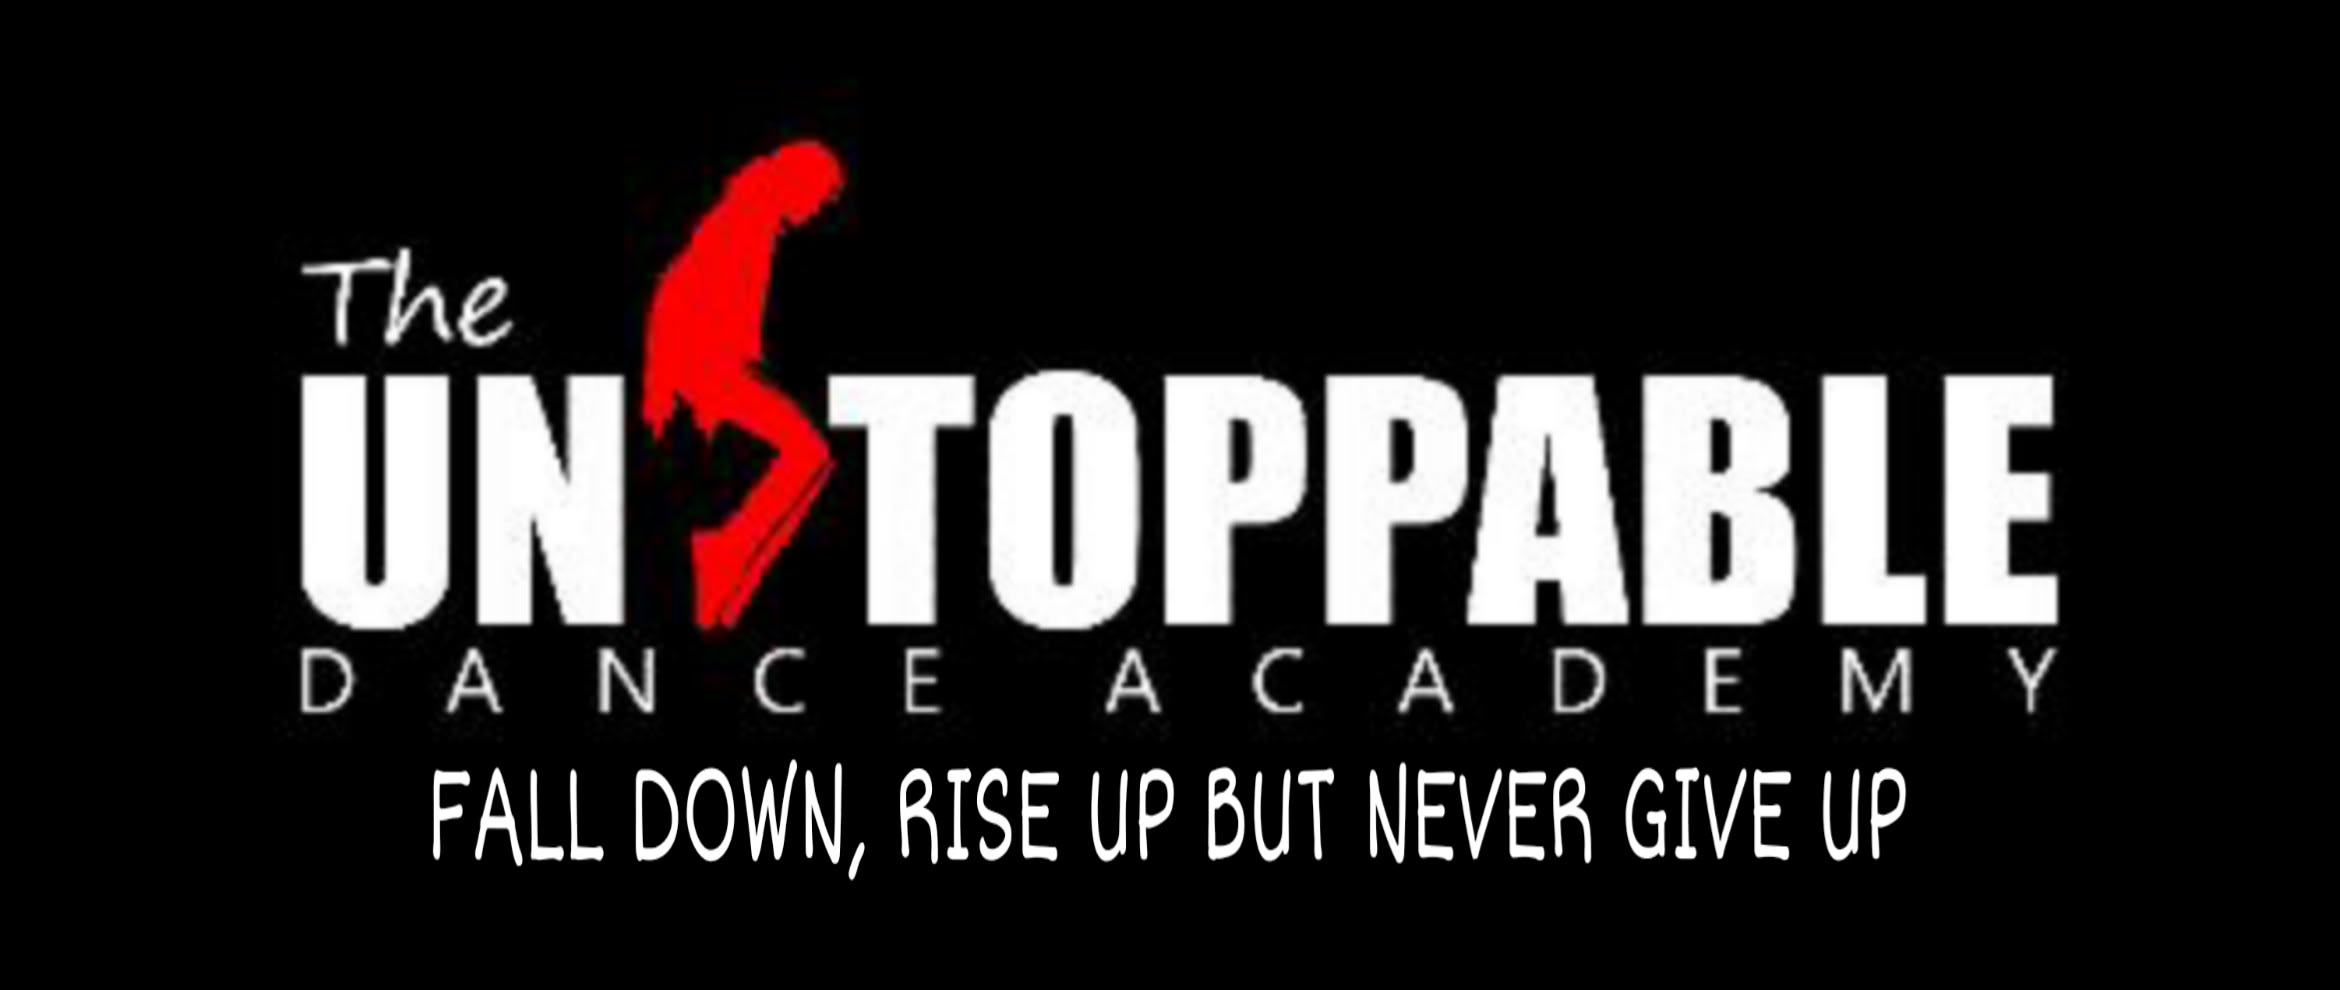 The Unstoppable Dance Academy